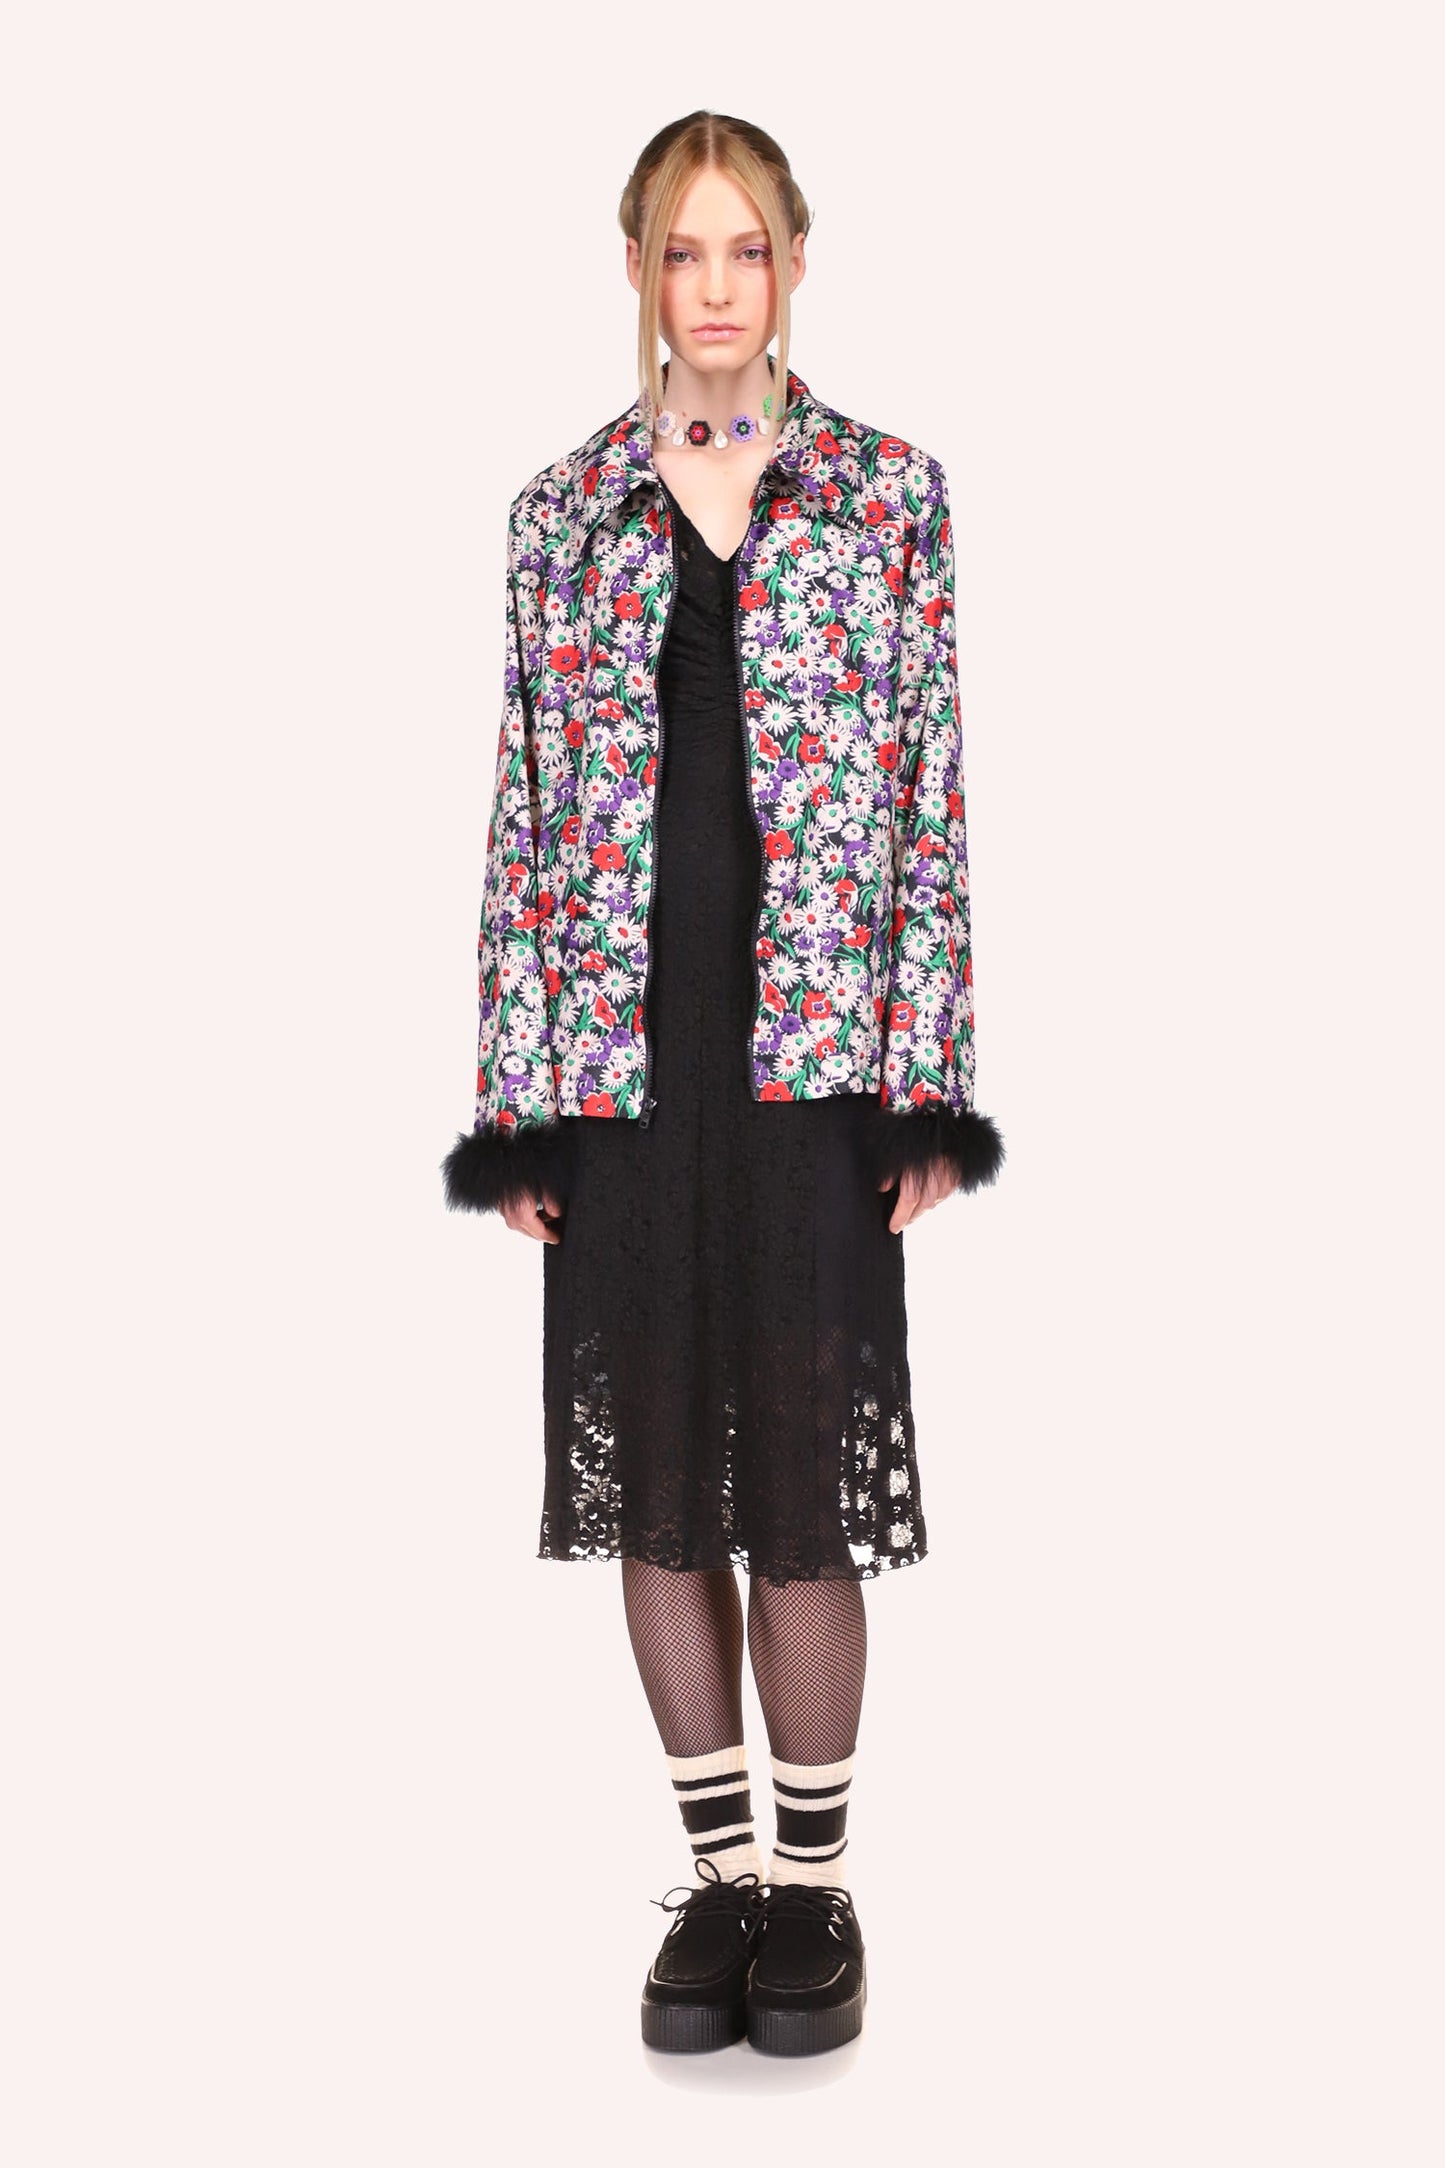 Daisies Windbreaker Jacket Rouge can be worn above Floral Stretch Lace Ruched Dress